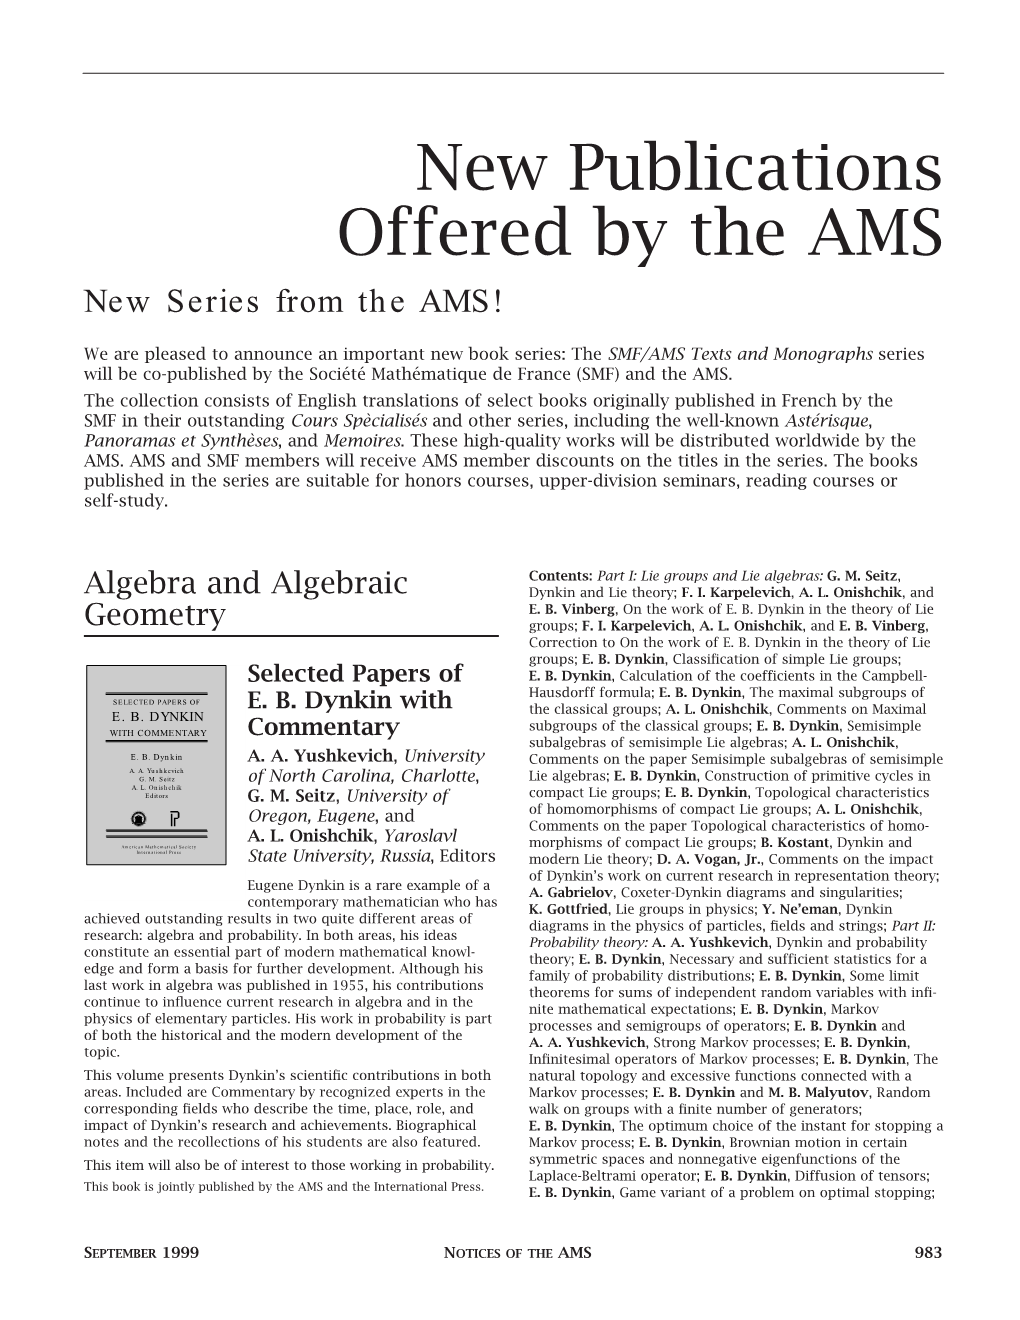 New Publications Offered by the AMS New Series from the AMS!